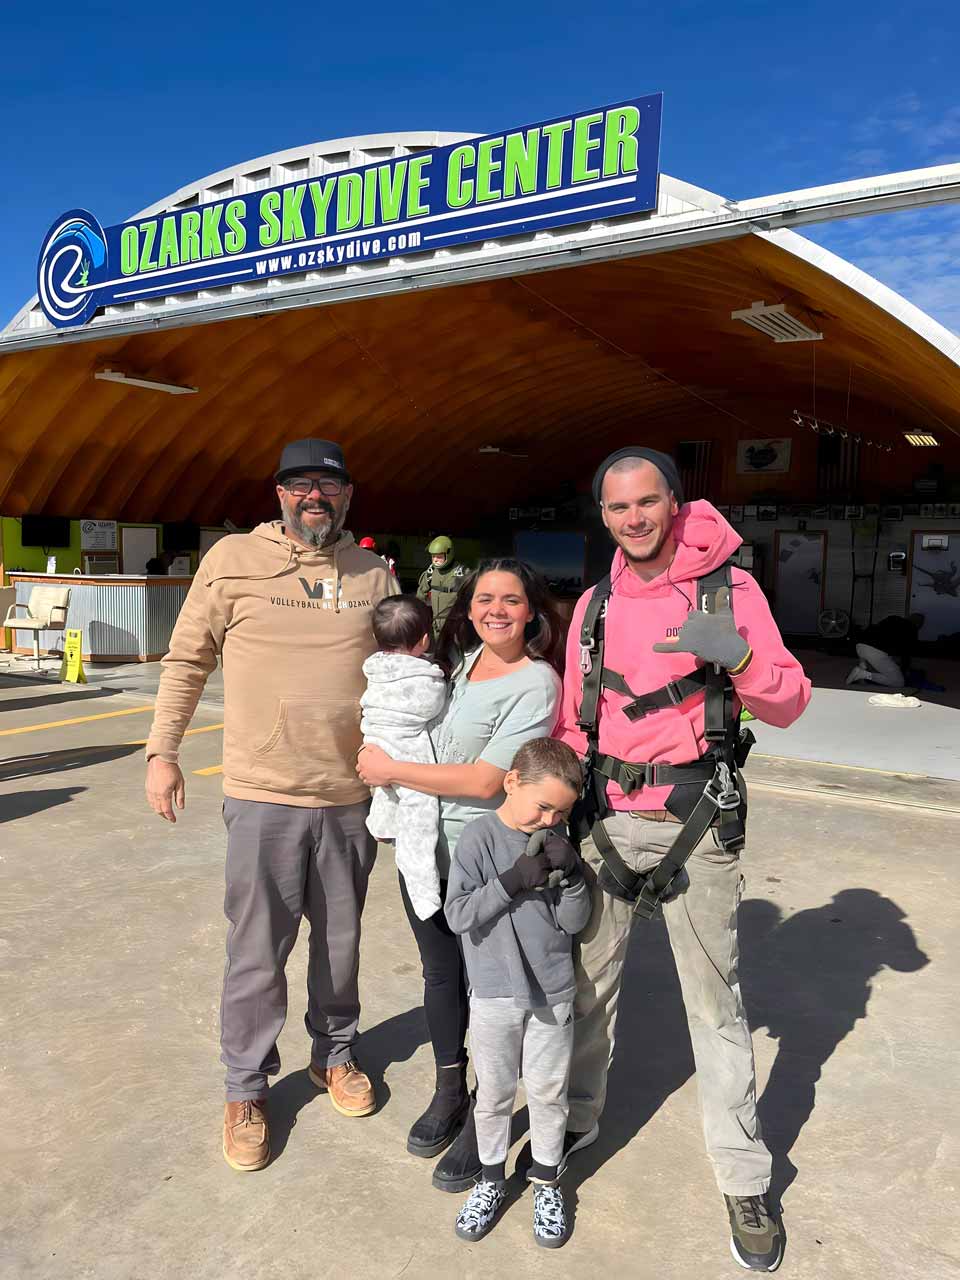 family poses in front of OZARKS Skydive Center sign